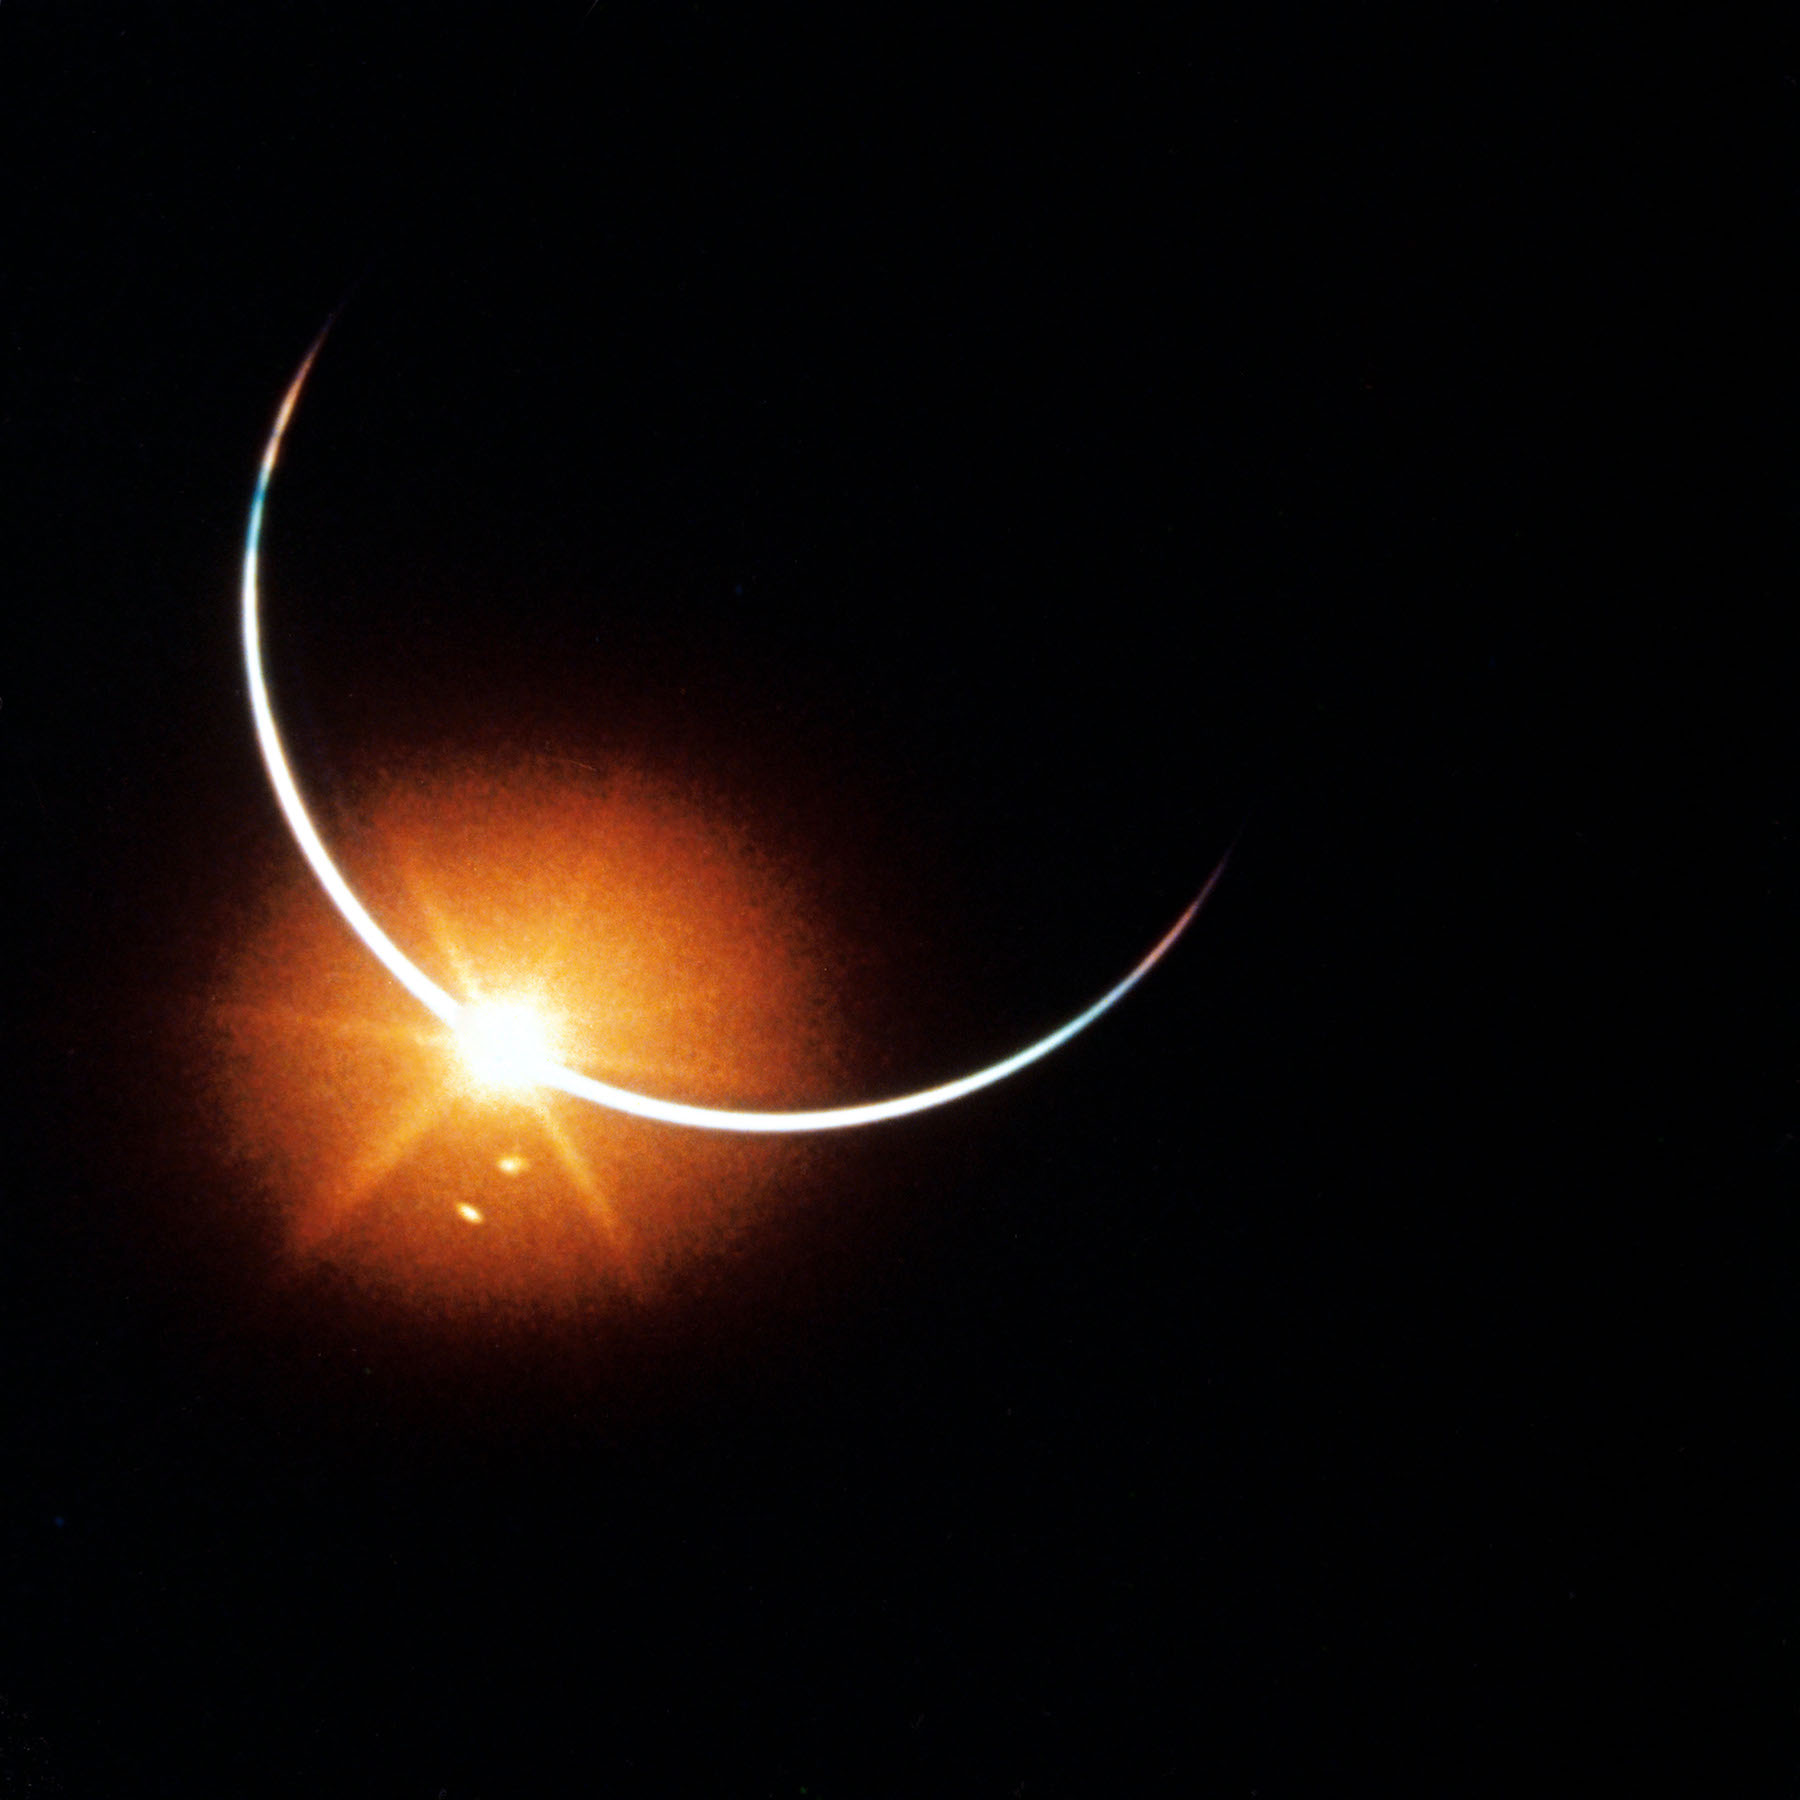 crescent earth and lens flare from bright point of sun peeking over the horizon